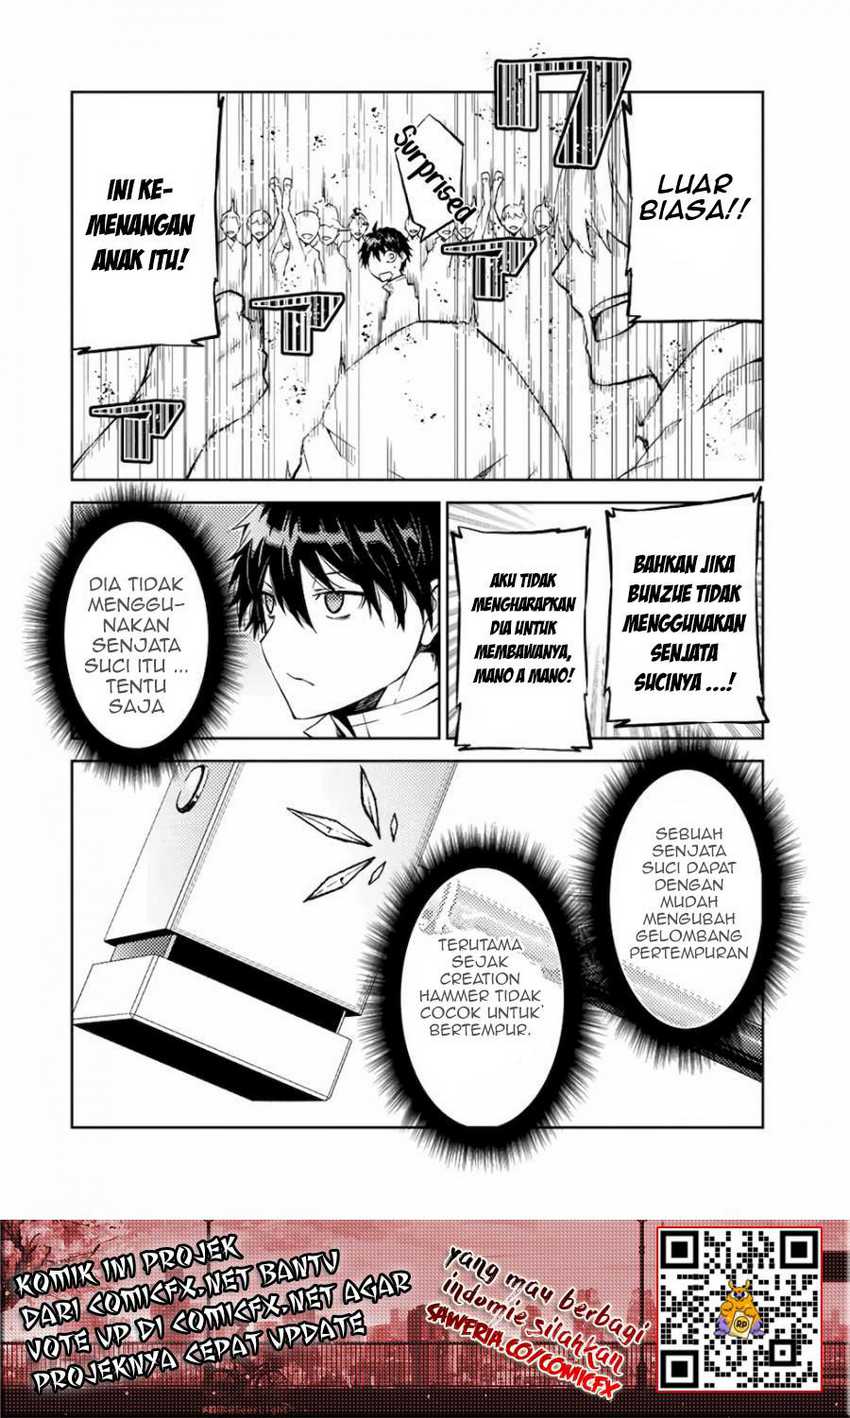 The Weakest Occupation “Blacksmith,” but It’s Actually the Strongest Chapter 24 Bahasa Indonesia